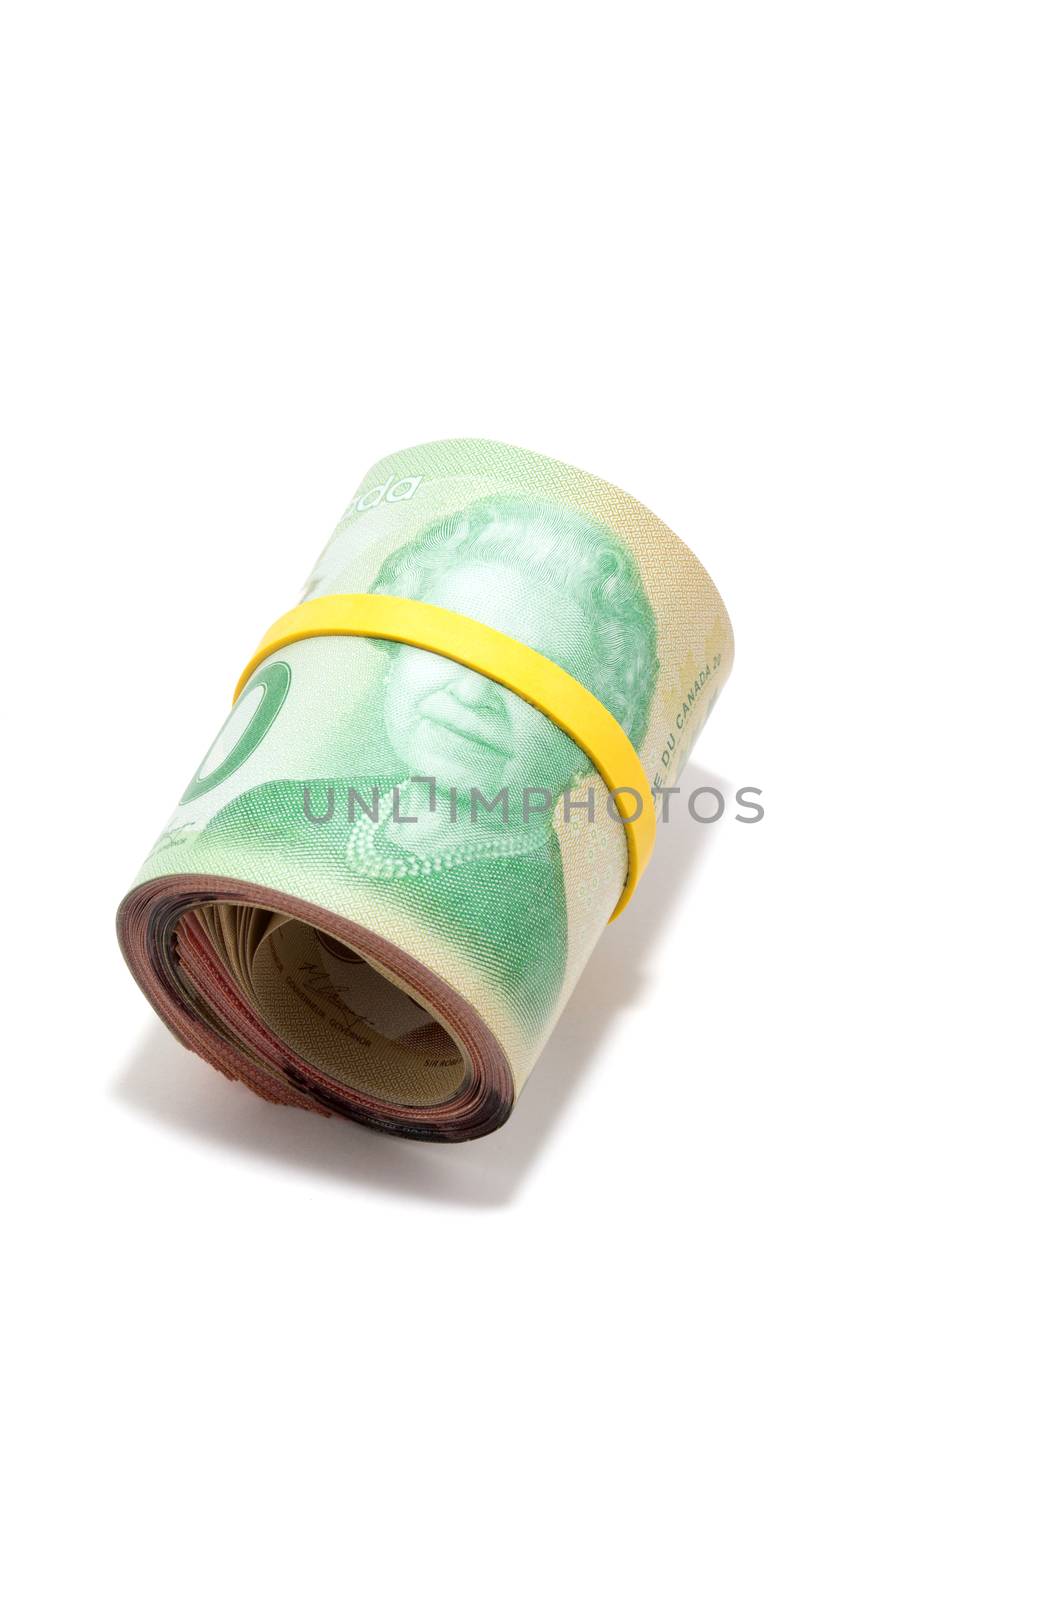 Roll of twenty Canadian dollars isolated on white background by daoleduc